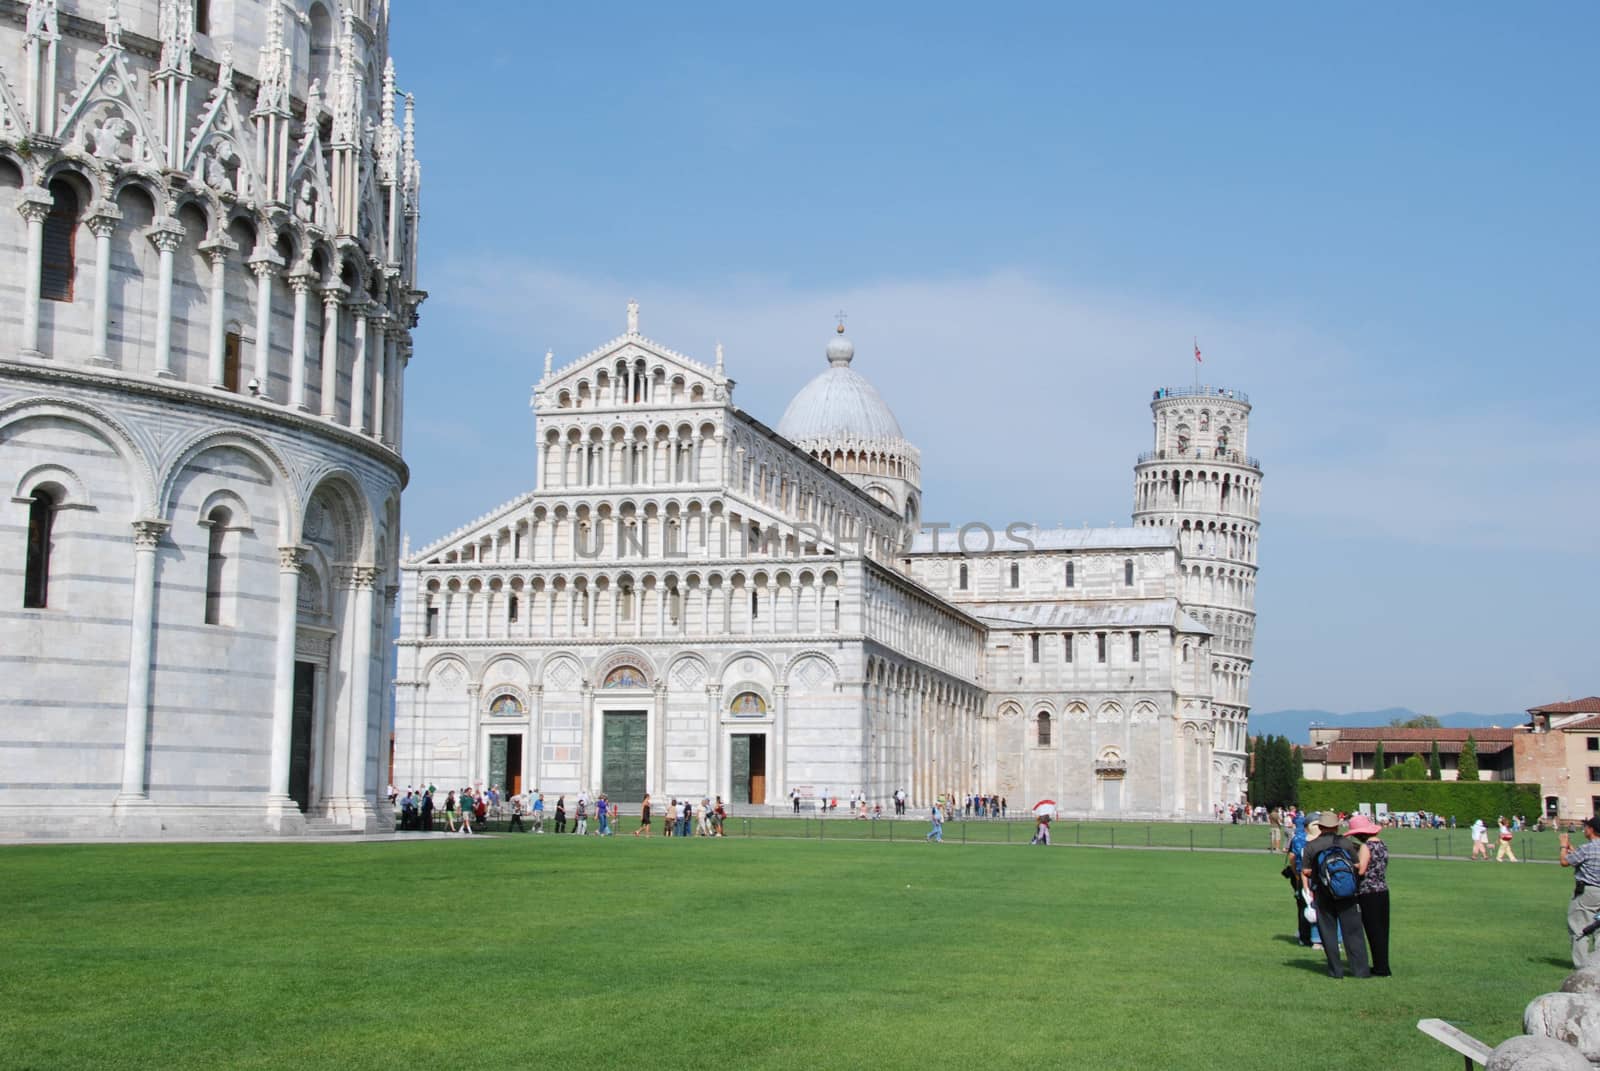 Buildings in Piazza dei Miracoli in Pisa, Italy by cosca